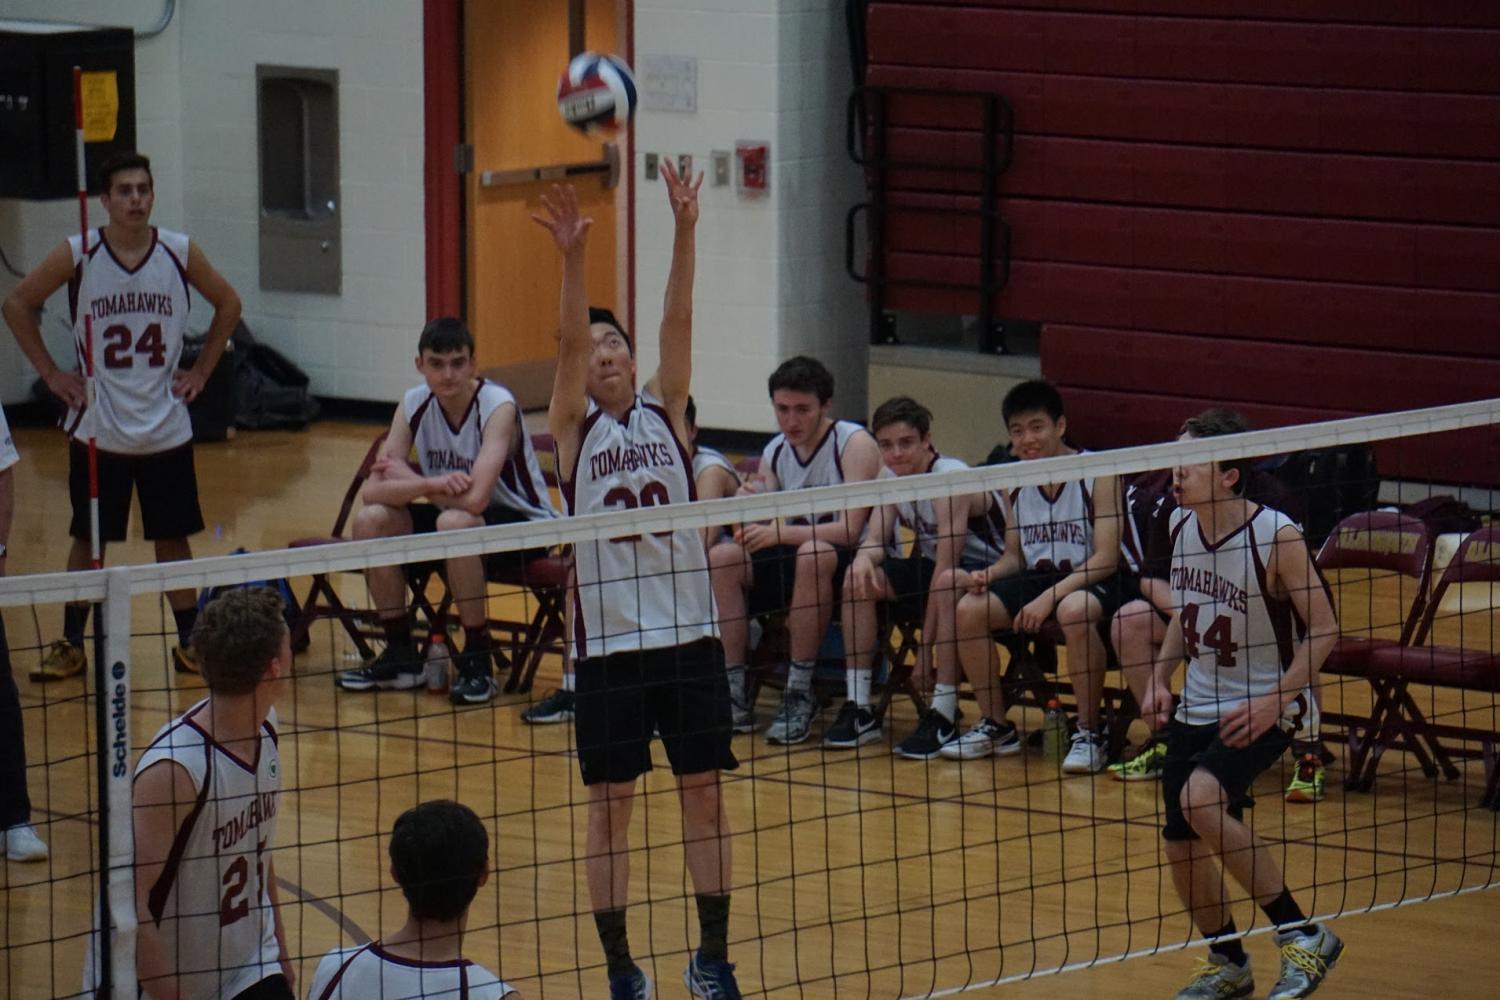 Junior Alex Chen sets the ball, helping his fellow team mates get ready to continue the play.